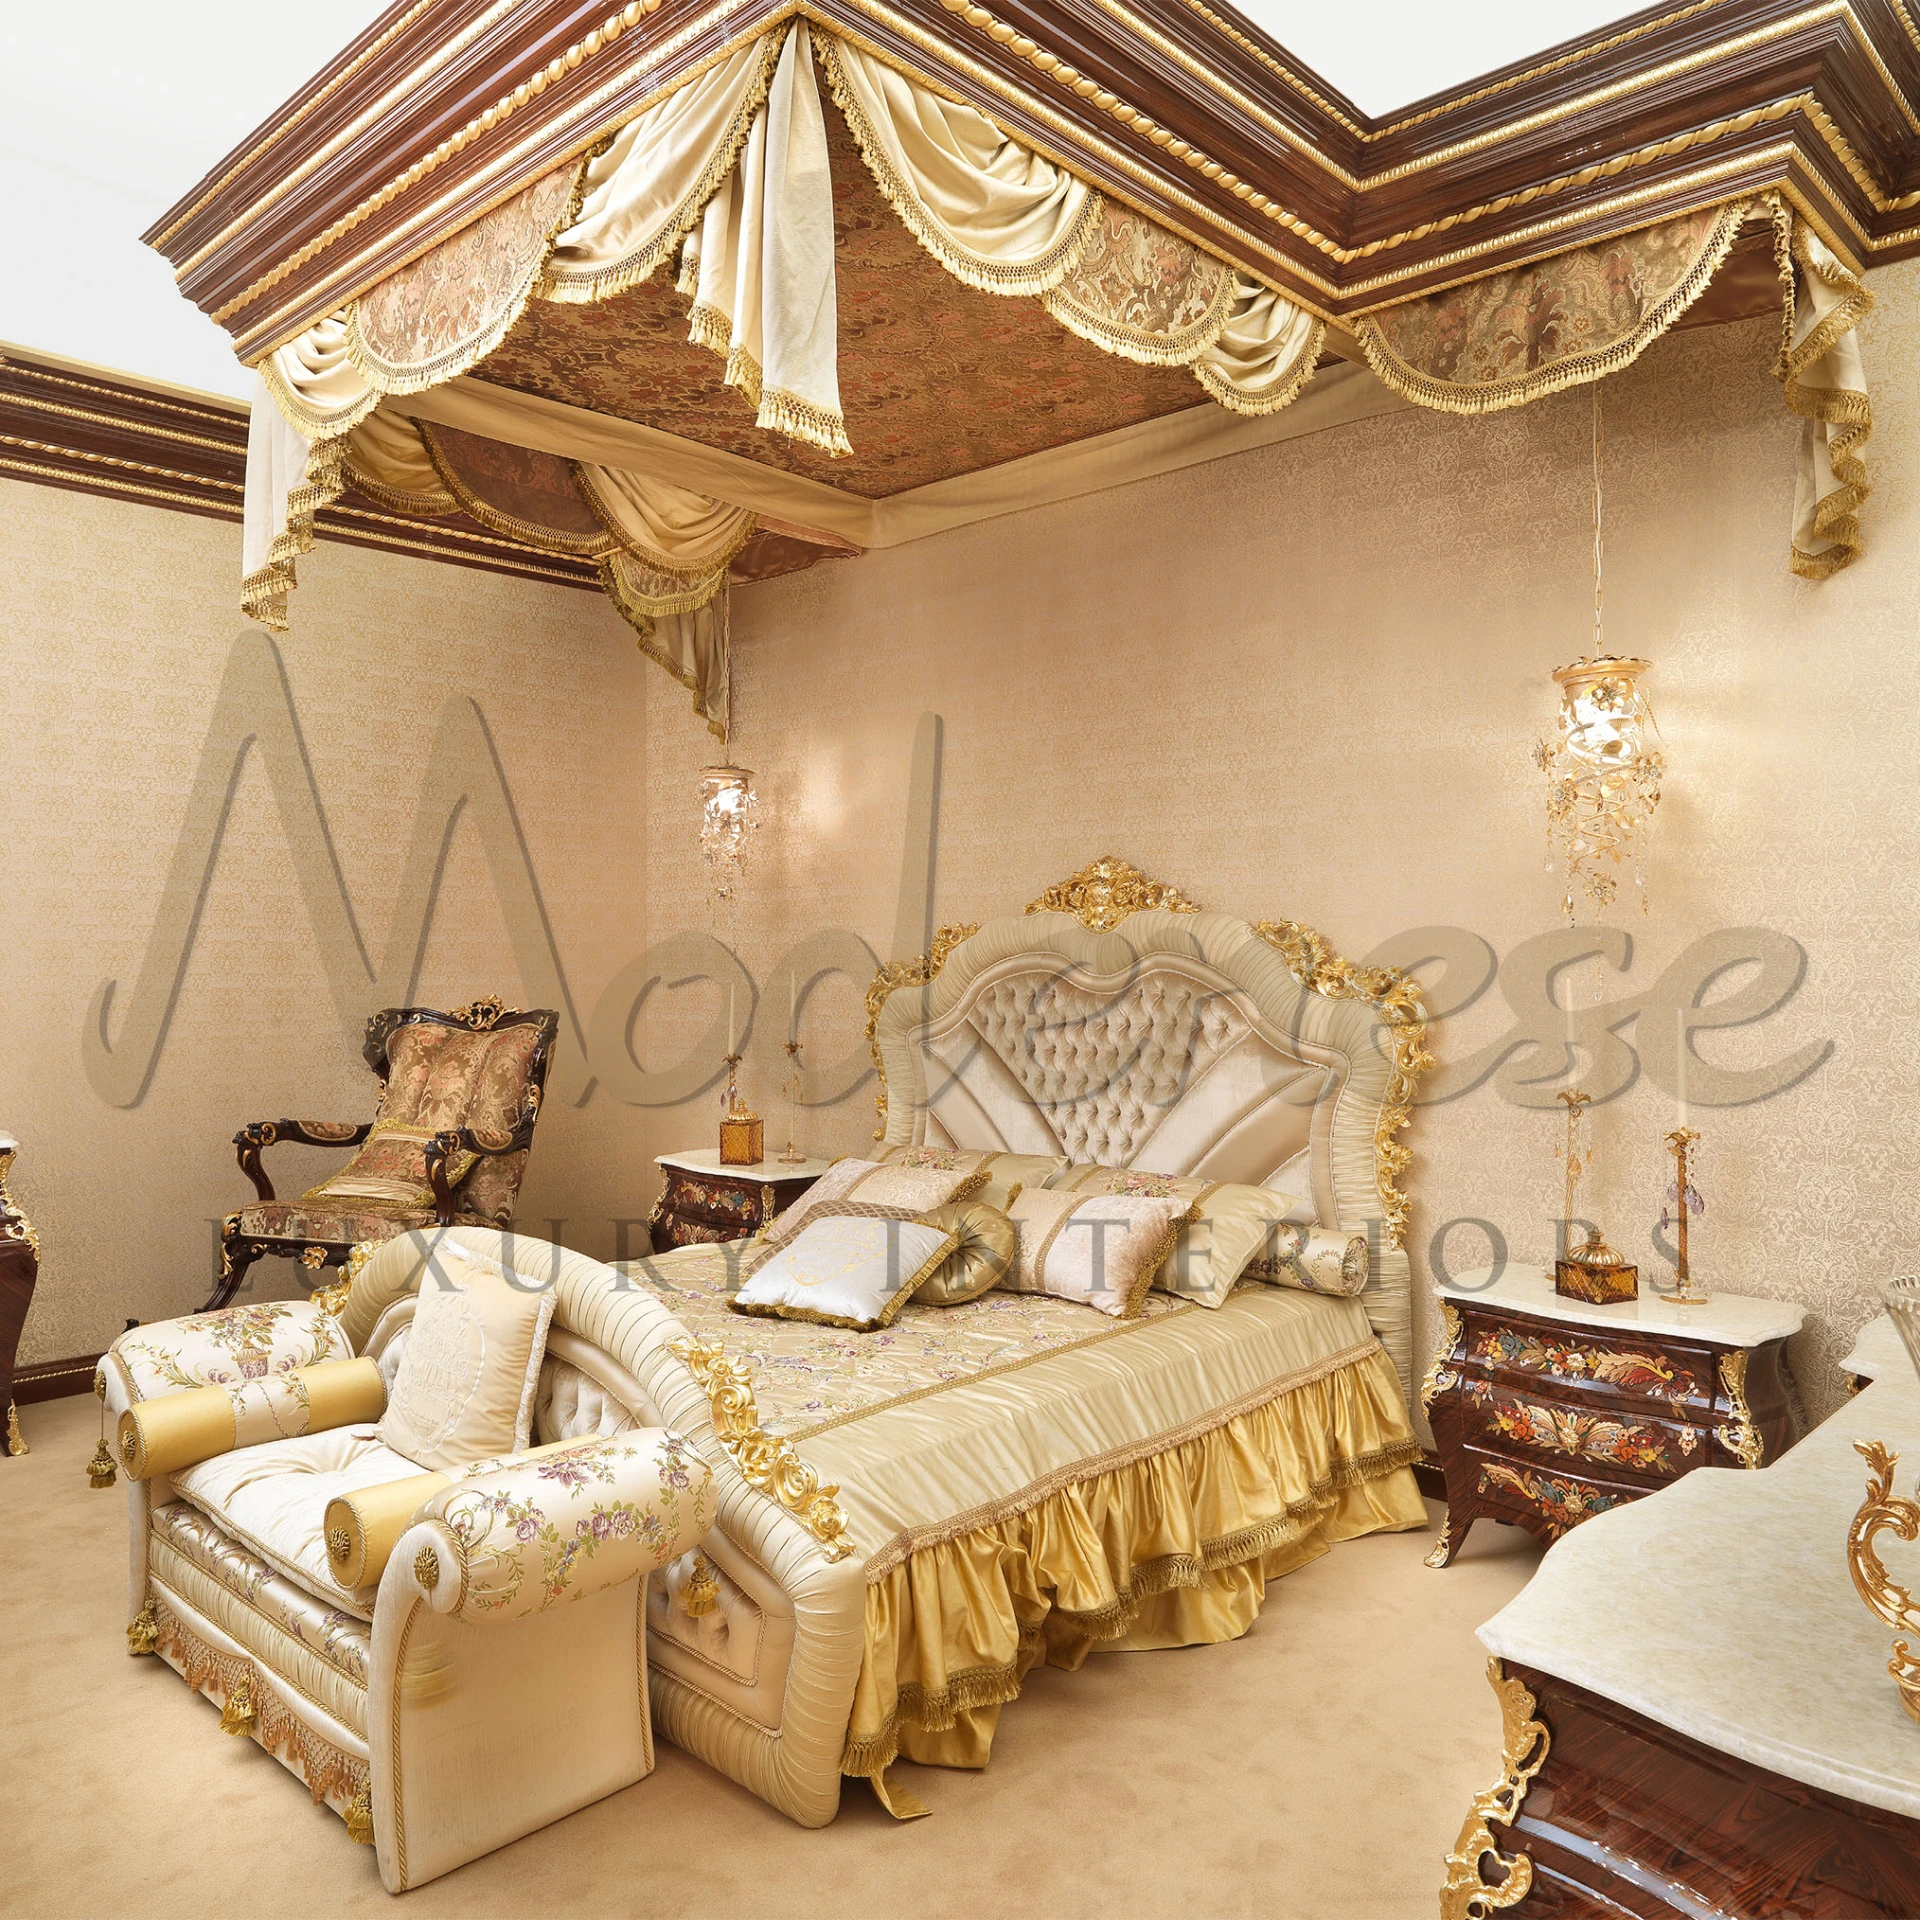 Opulent bedroom interior featuring a luxurious gold and cream bed with tufted headboard, elaborate drapery, matching ornate furniture, and crystal lighting.